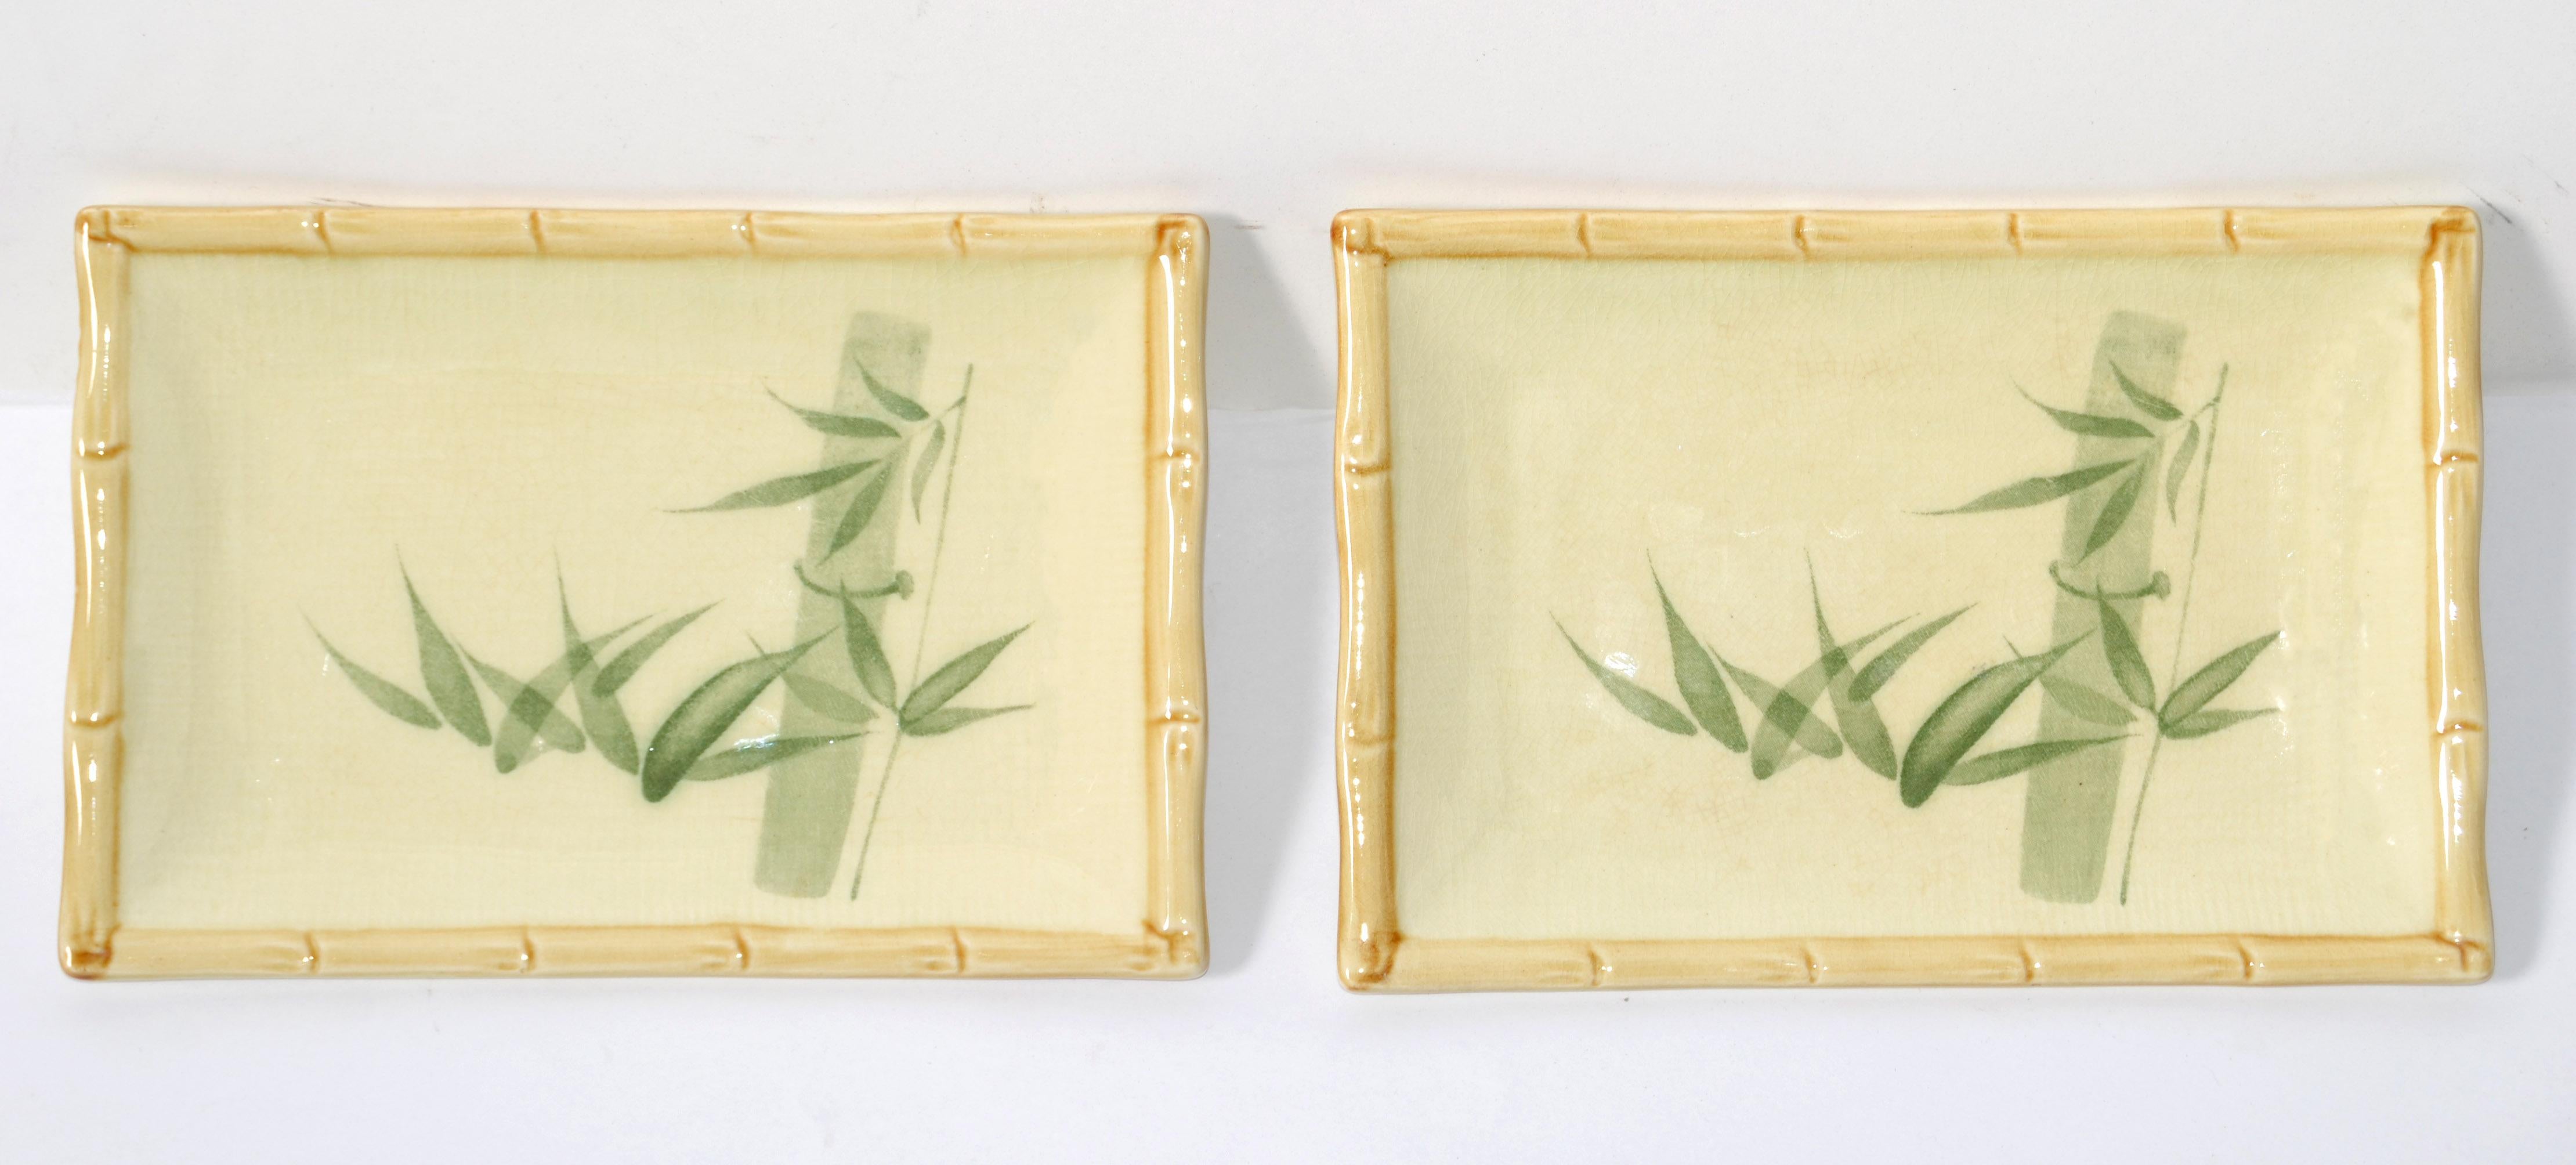 Miya Japan Pair of Porcelain Serving Trays or rectangle Plates for Sushi. Made in Japan circa 1980 and have a hand painted Bamboo Décor and framed in faux bamboo texture.
In very good condition with minor signs of wear.
Makers Gold Foil label at